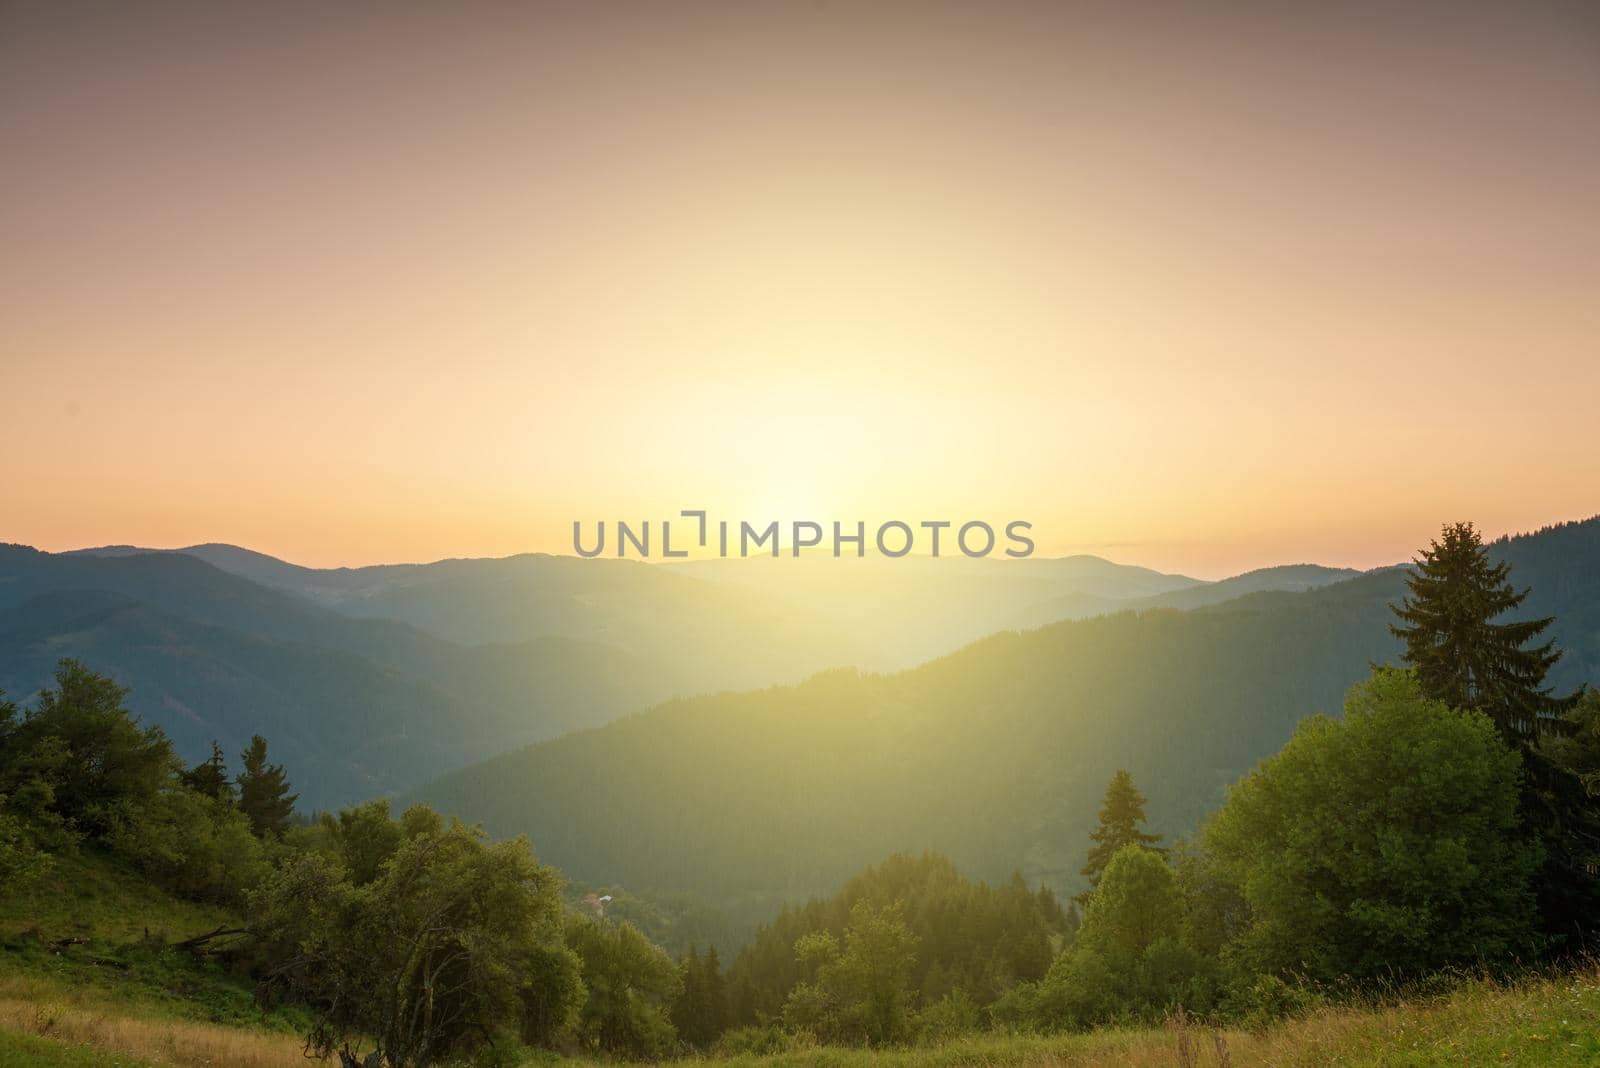 Panoramic view of colorful sunrise in mountains in summer 